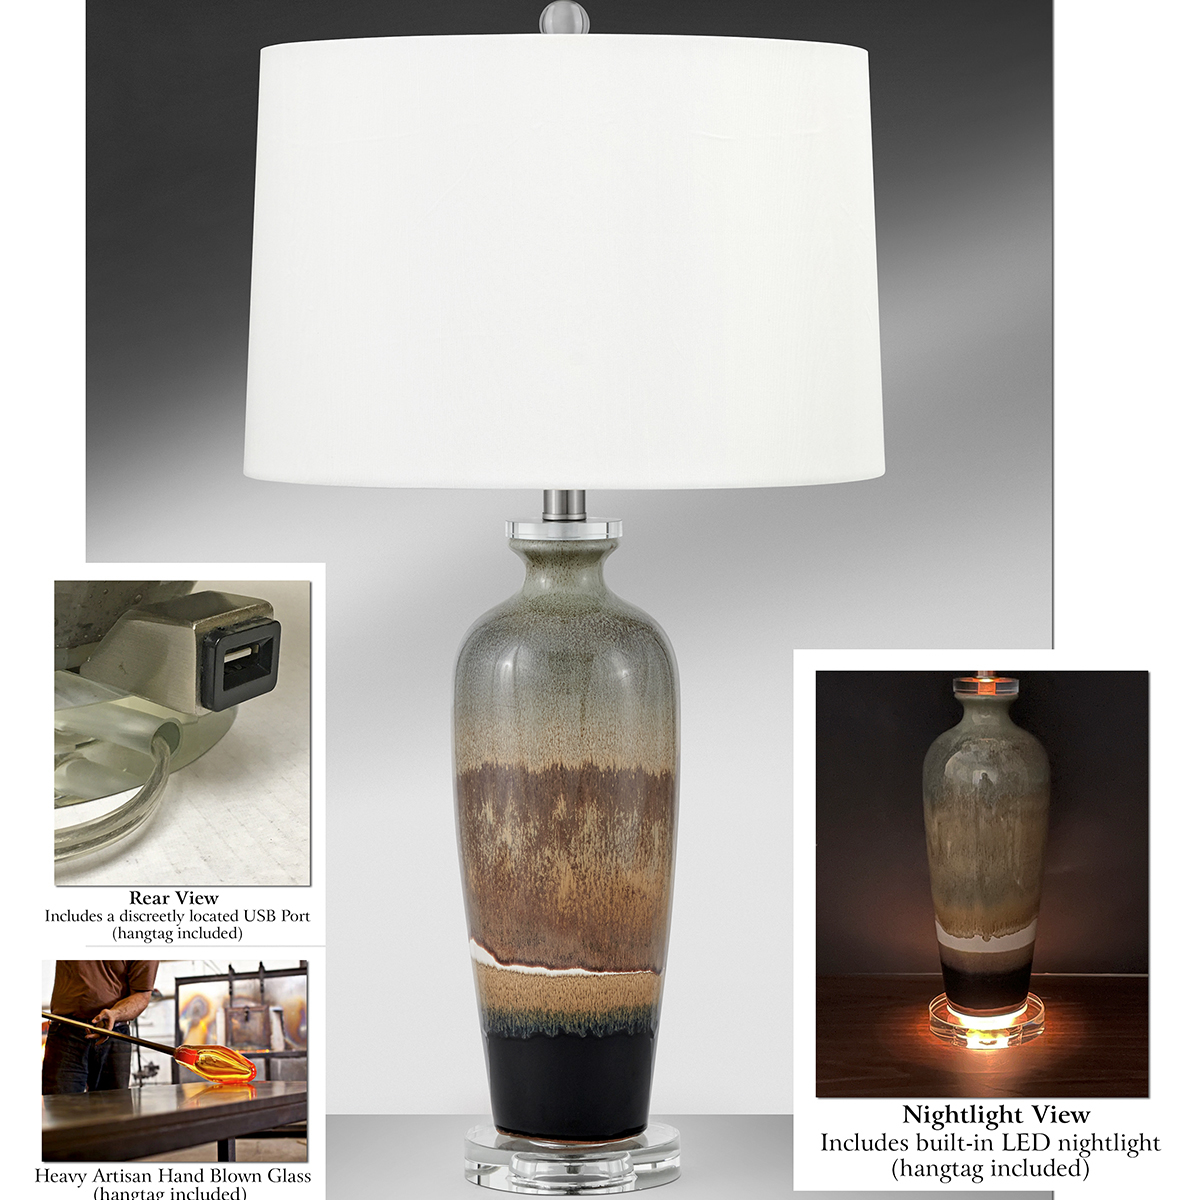 Picture of TAN/BROWN TABLE LAMP